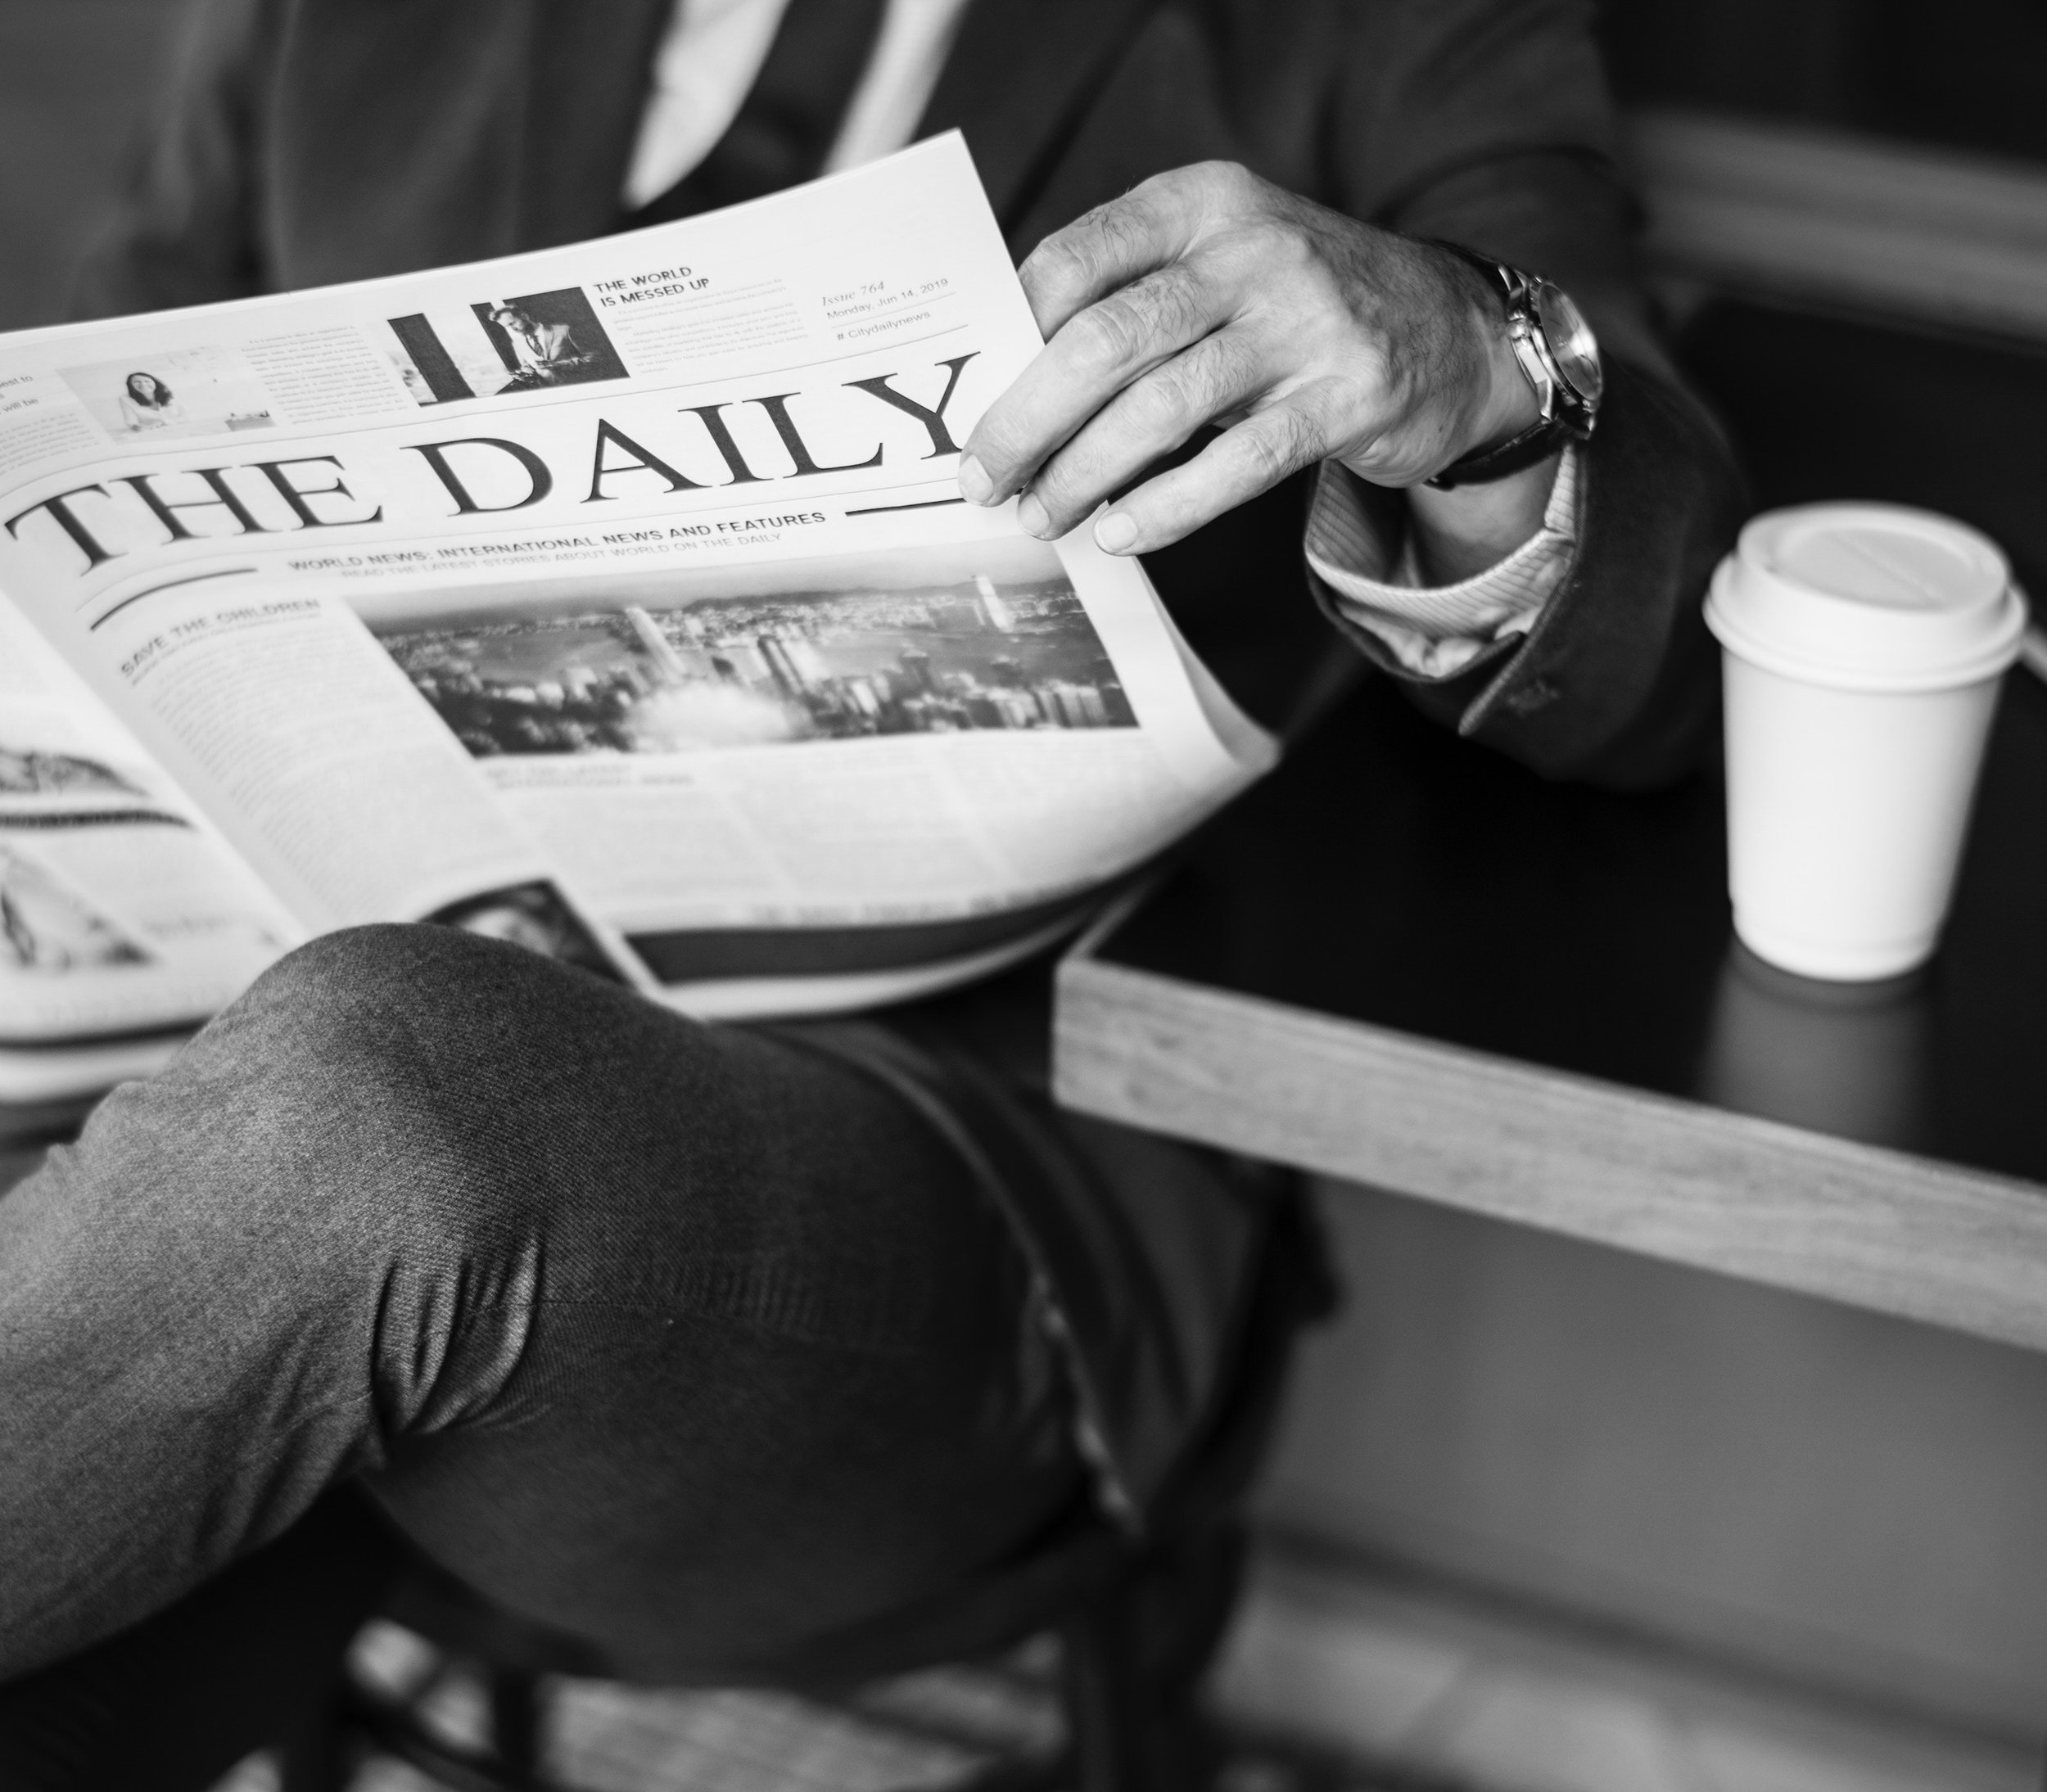 A man reads a newspaper with a cup of coffee on the table next to him